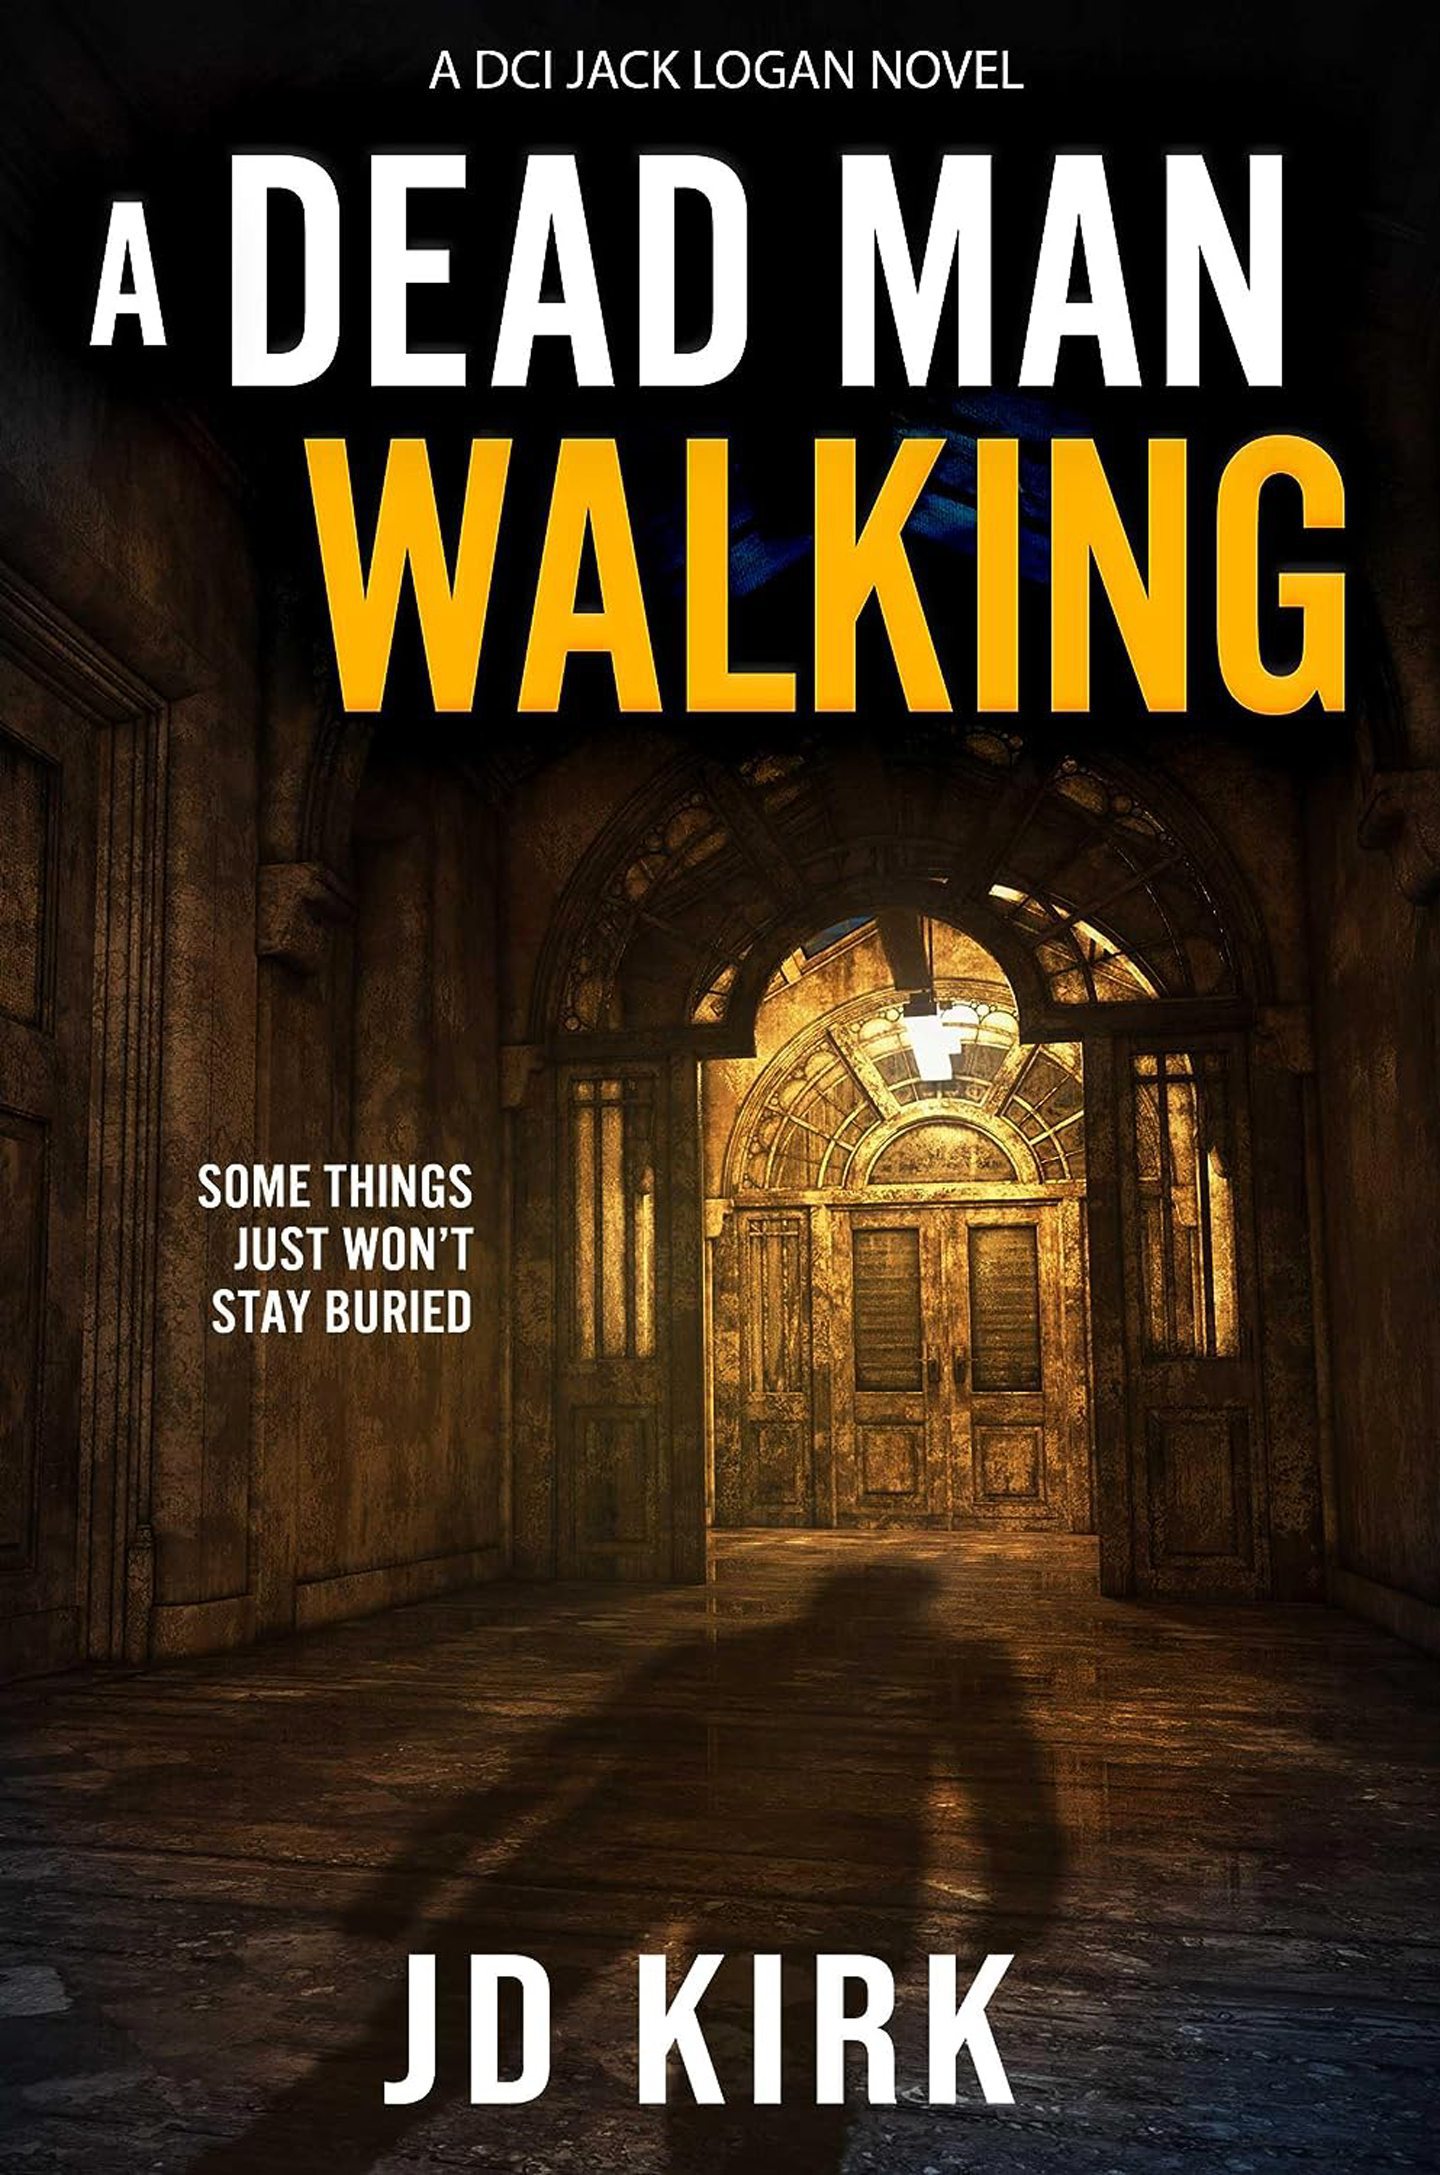 The book cover of the 18th instalment of the DCI Jack Logan series, A Dead Man Walking, 